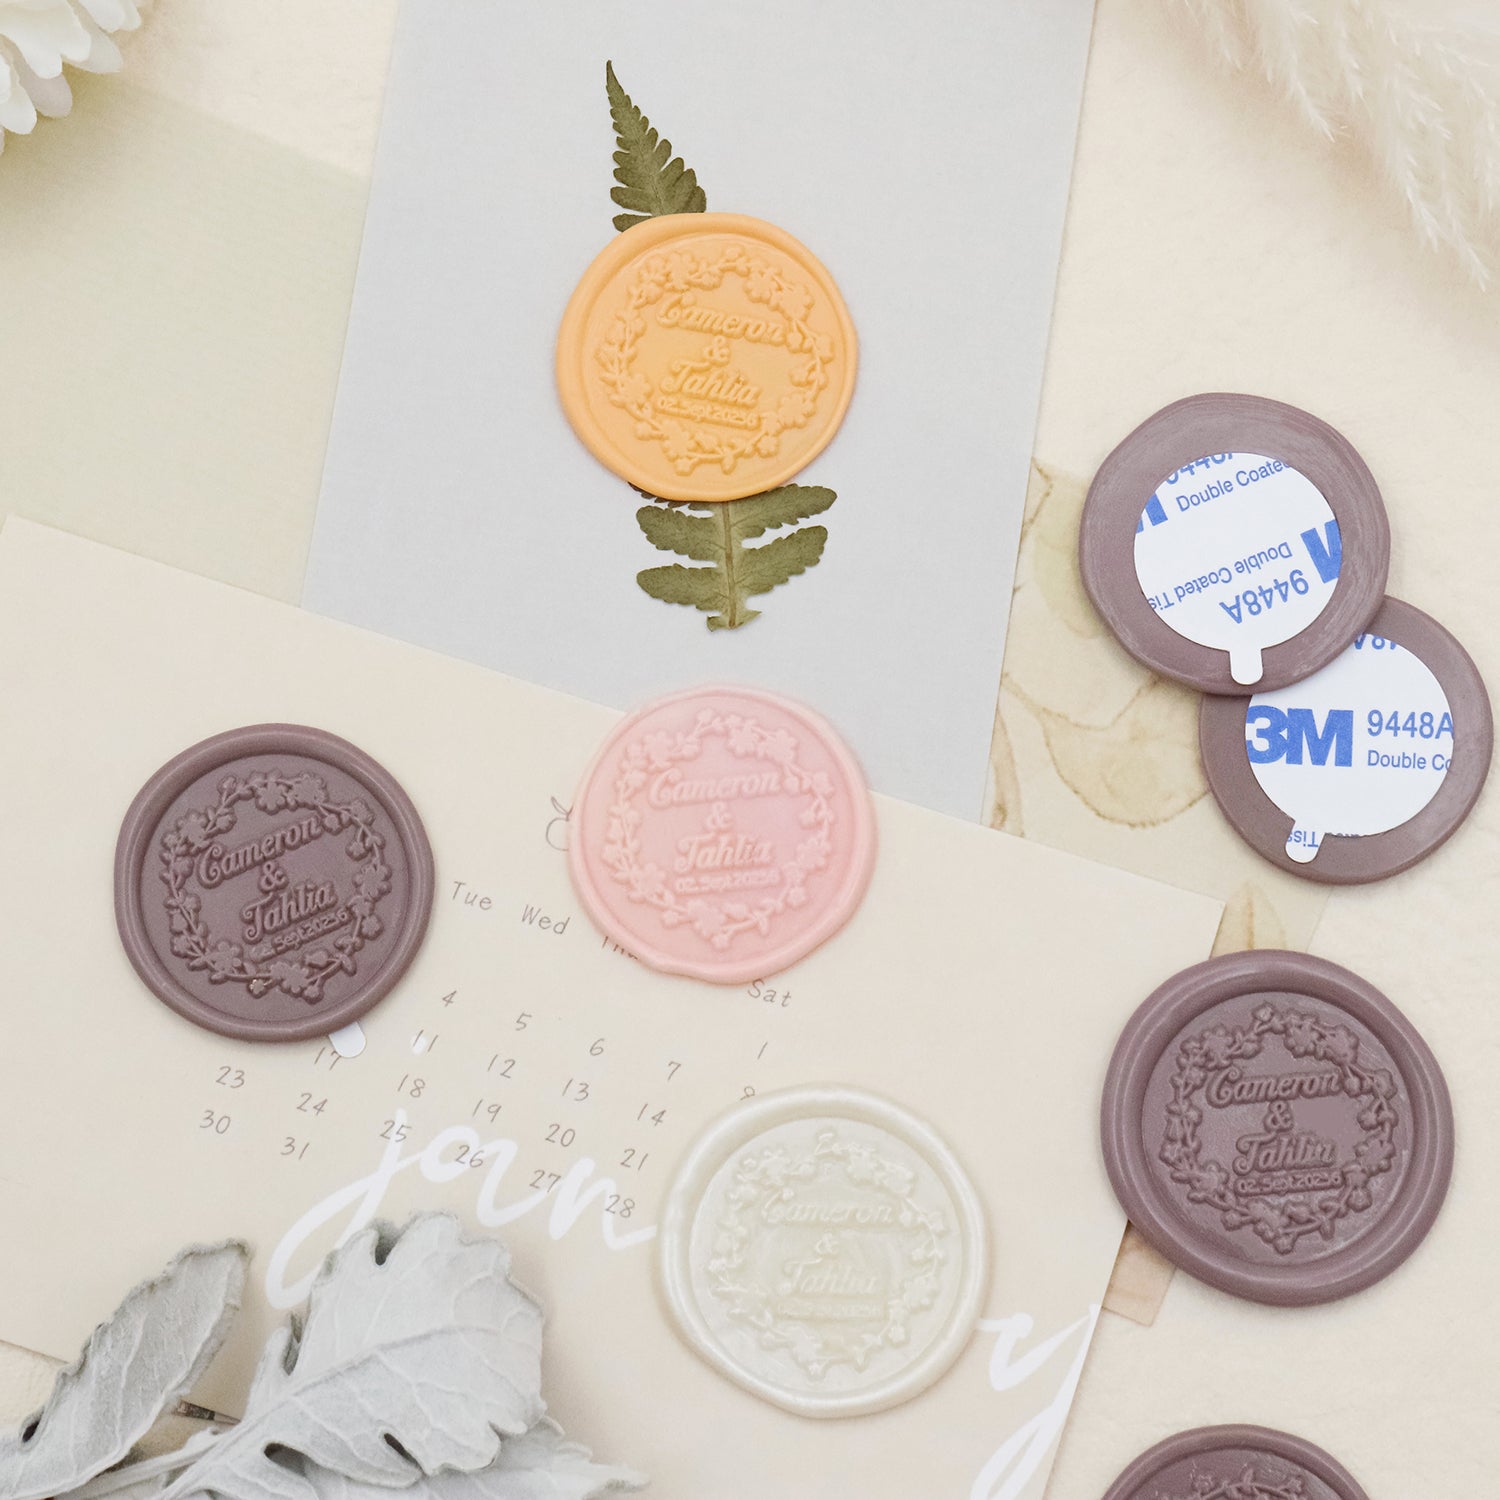 Olive Branch Double Initials Wedding Custom Self-Adhesive Wax Seal Stickers  - Personalized Elegance for Invitations, Favors, and More